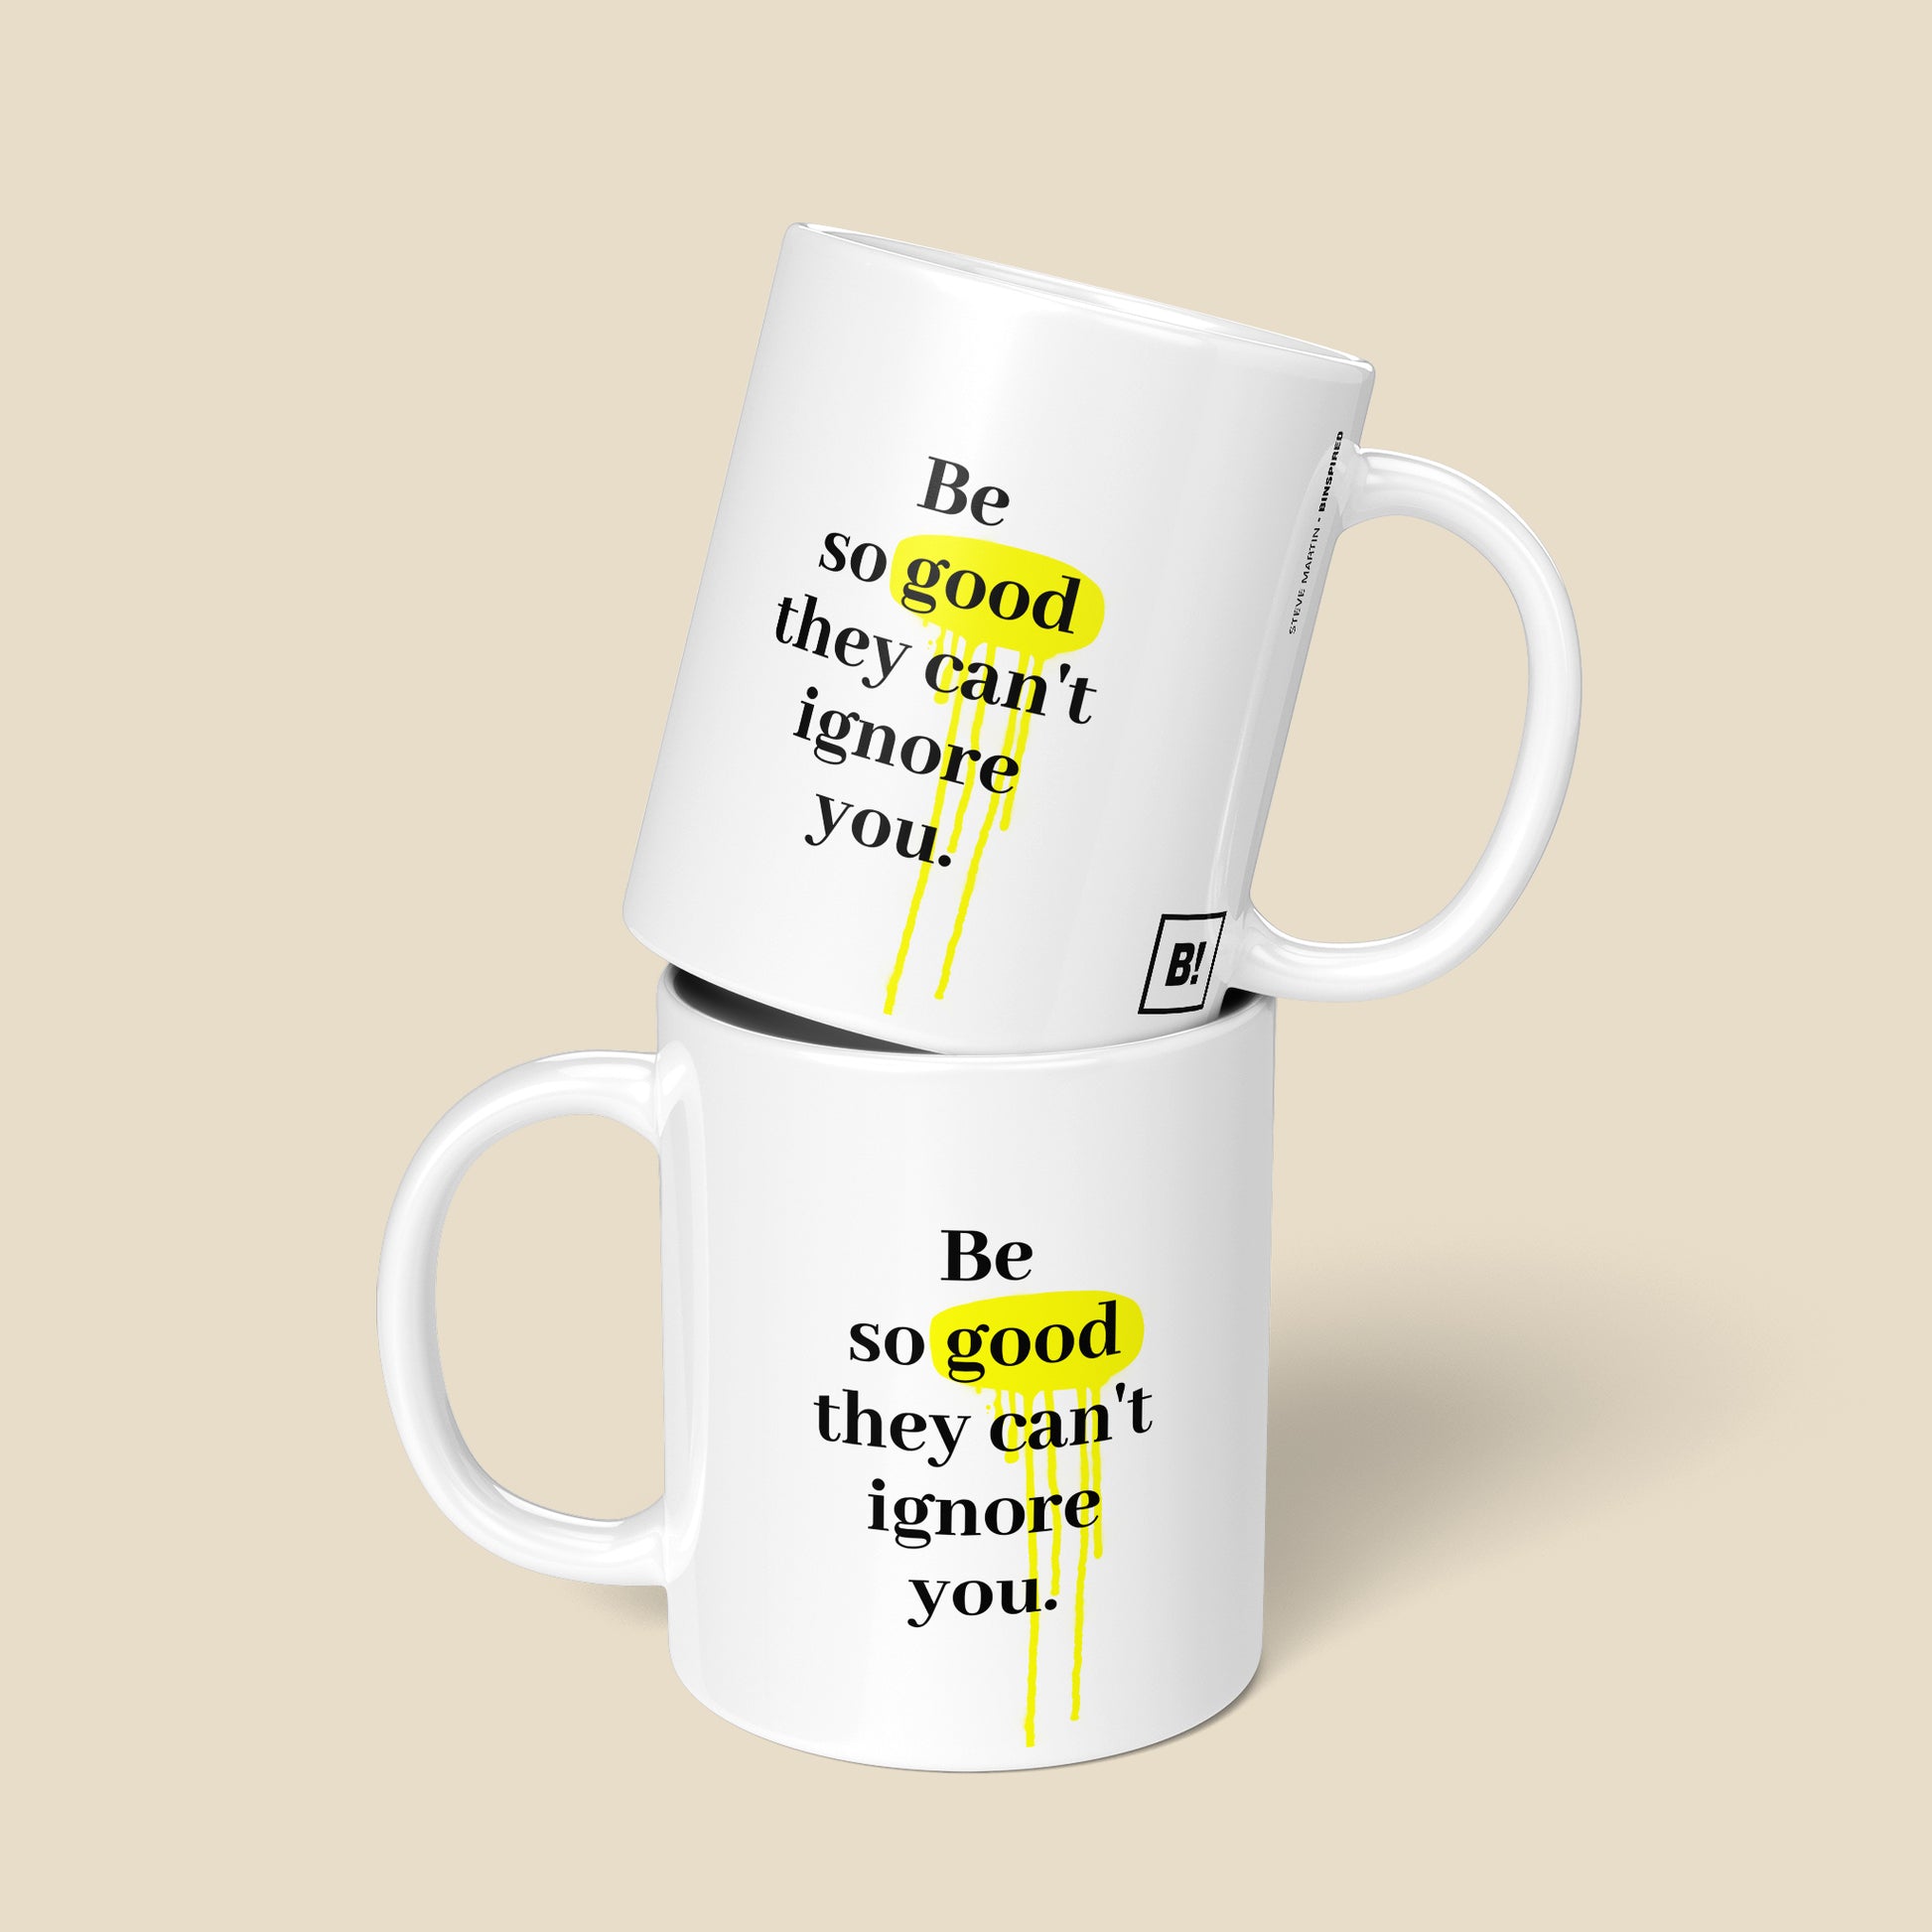 Be inspired by Steve Martin's famous quote, "Be so good they can't ignore you" on this 11oz white glossy coffee mug with a front and back view.